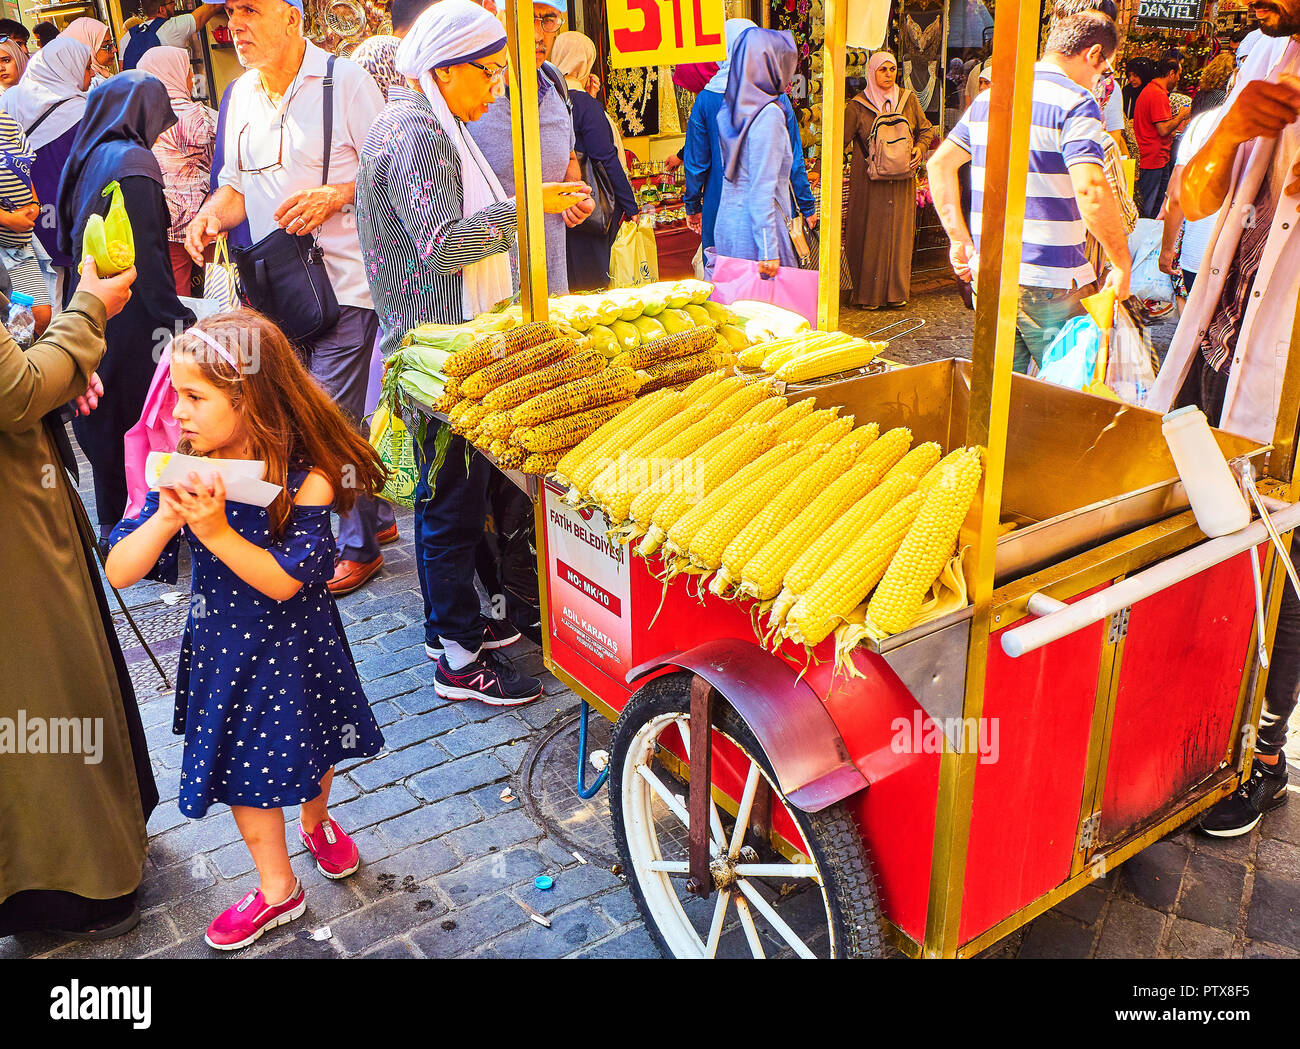 Istanbul, Turkey - July 11, 2018. A girl buying a corn cob at a street stall of Eminonu, a former district of Istanbul, Turkey. Stock Photo